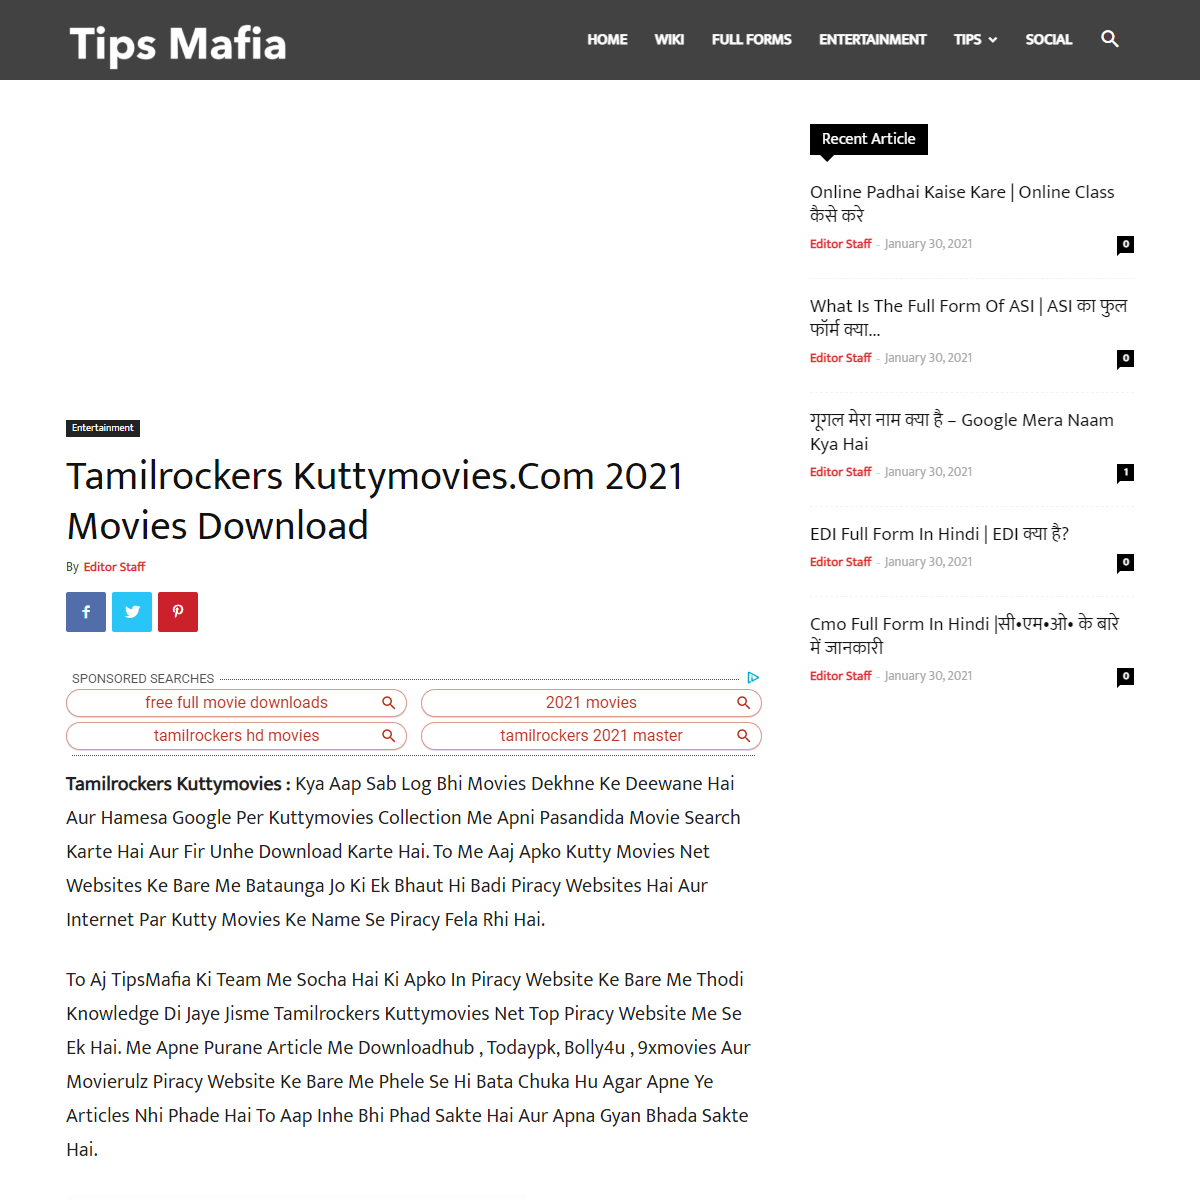 A complete backup of https://www.tipsmafia.org/kuttymovies/